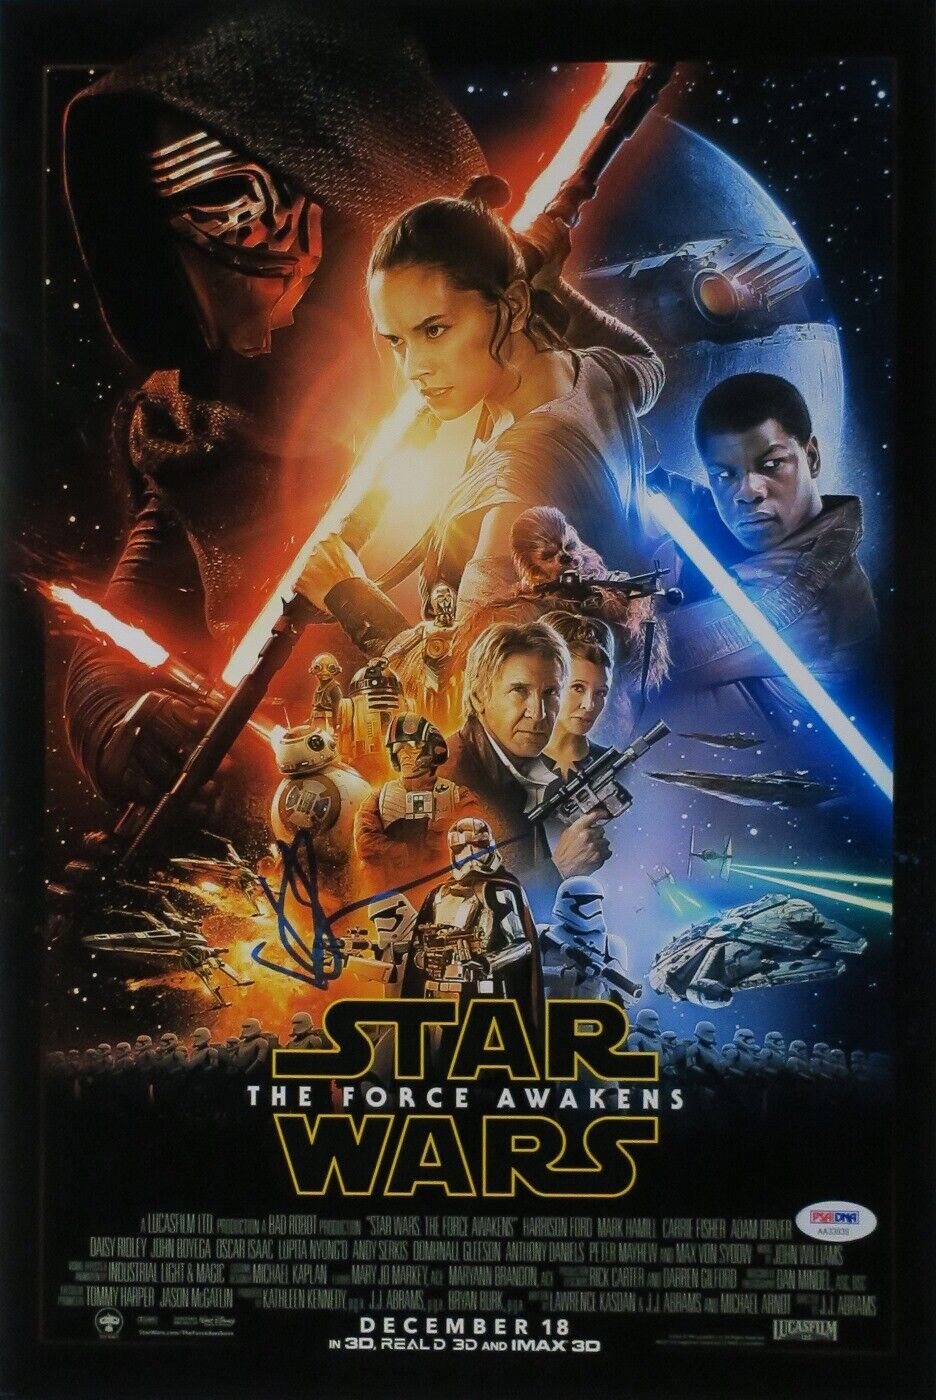 JJ Abrams Signed Star Wars Authentic Autographed 12x18 Photo Poster painting PSA/DNA #AA33939